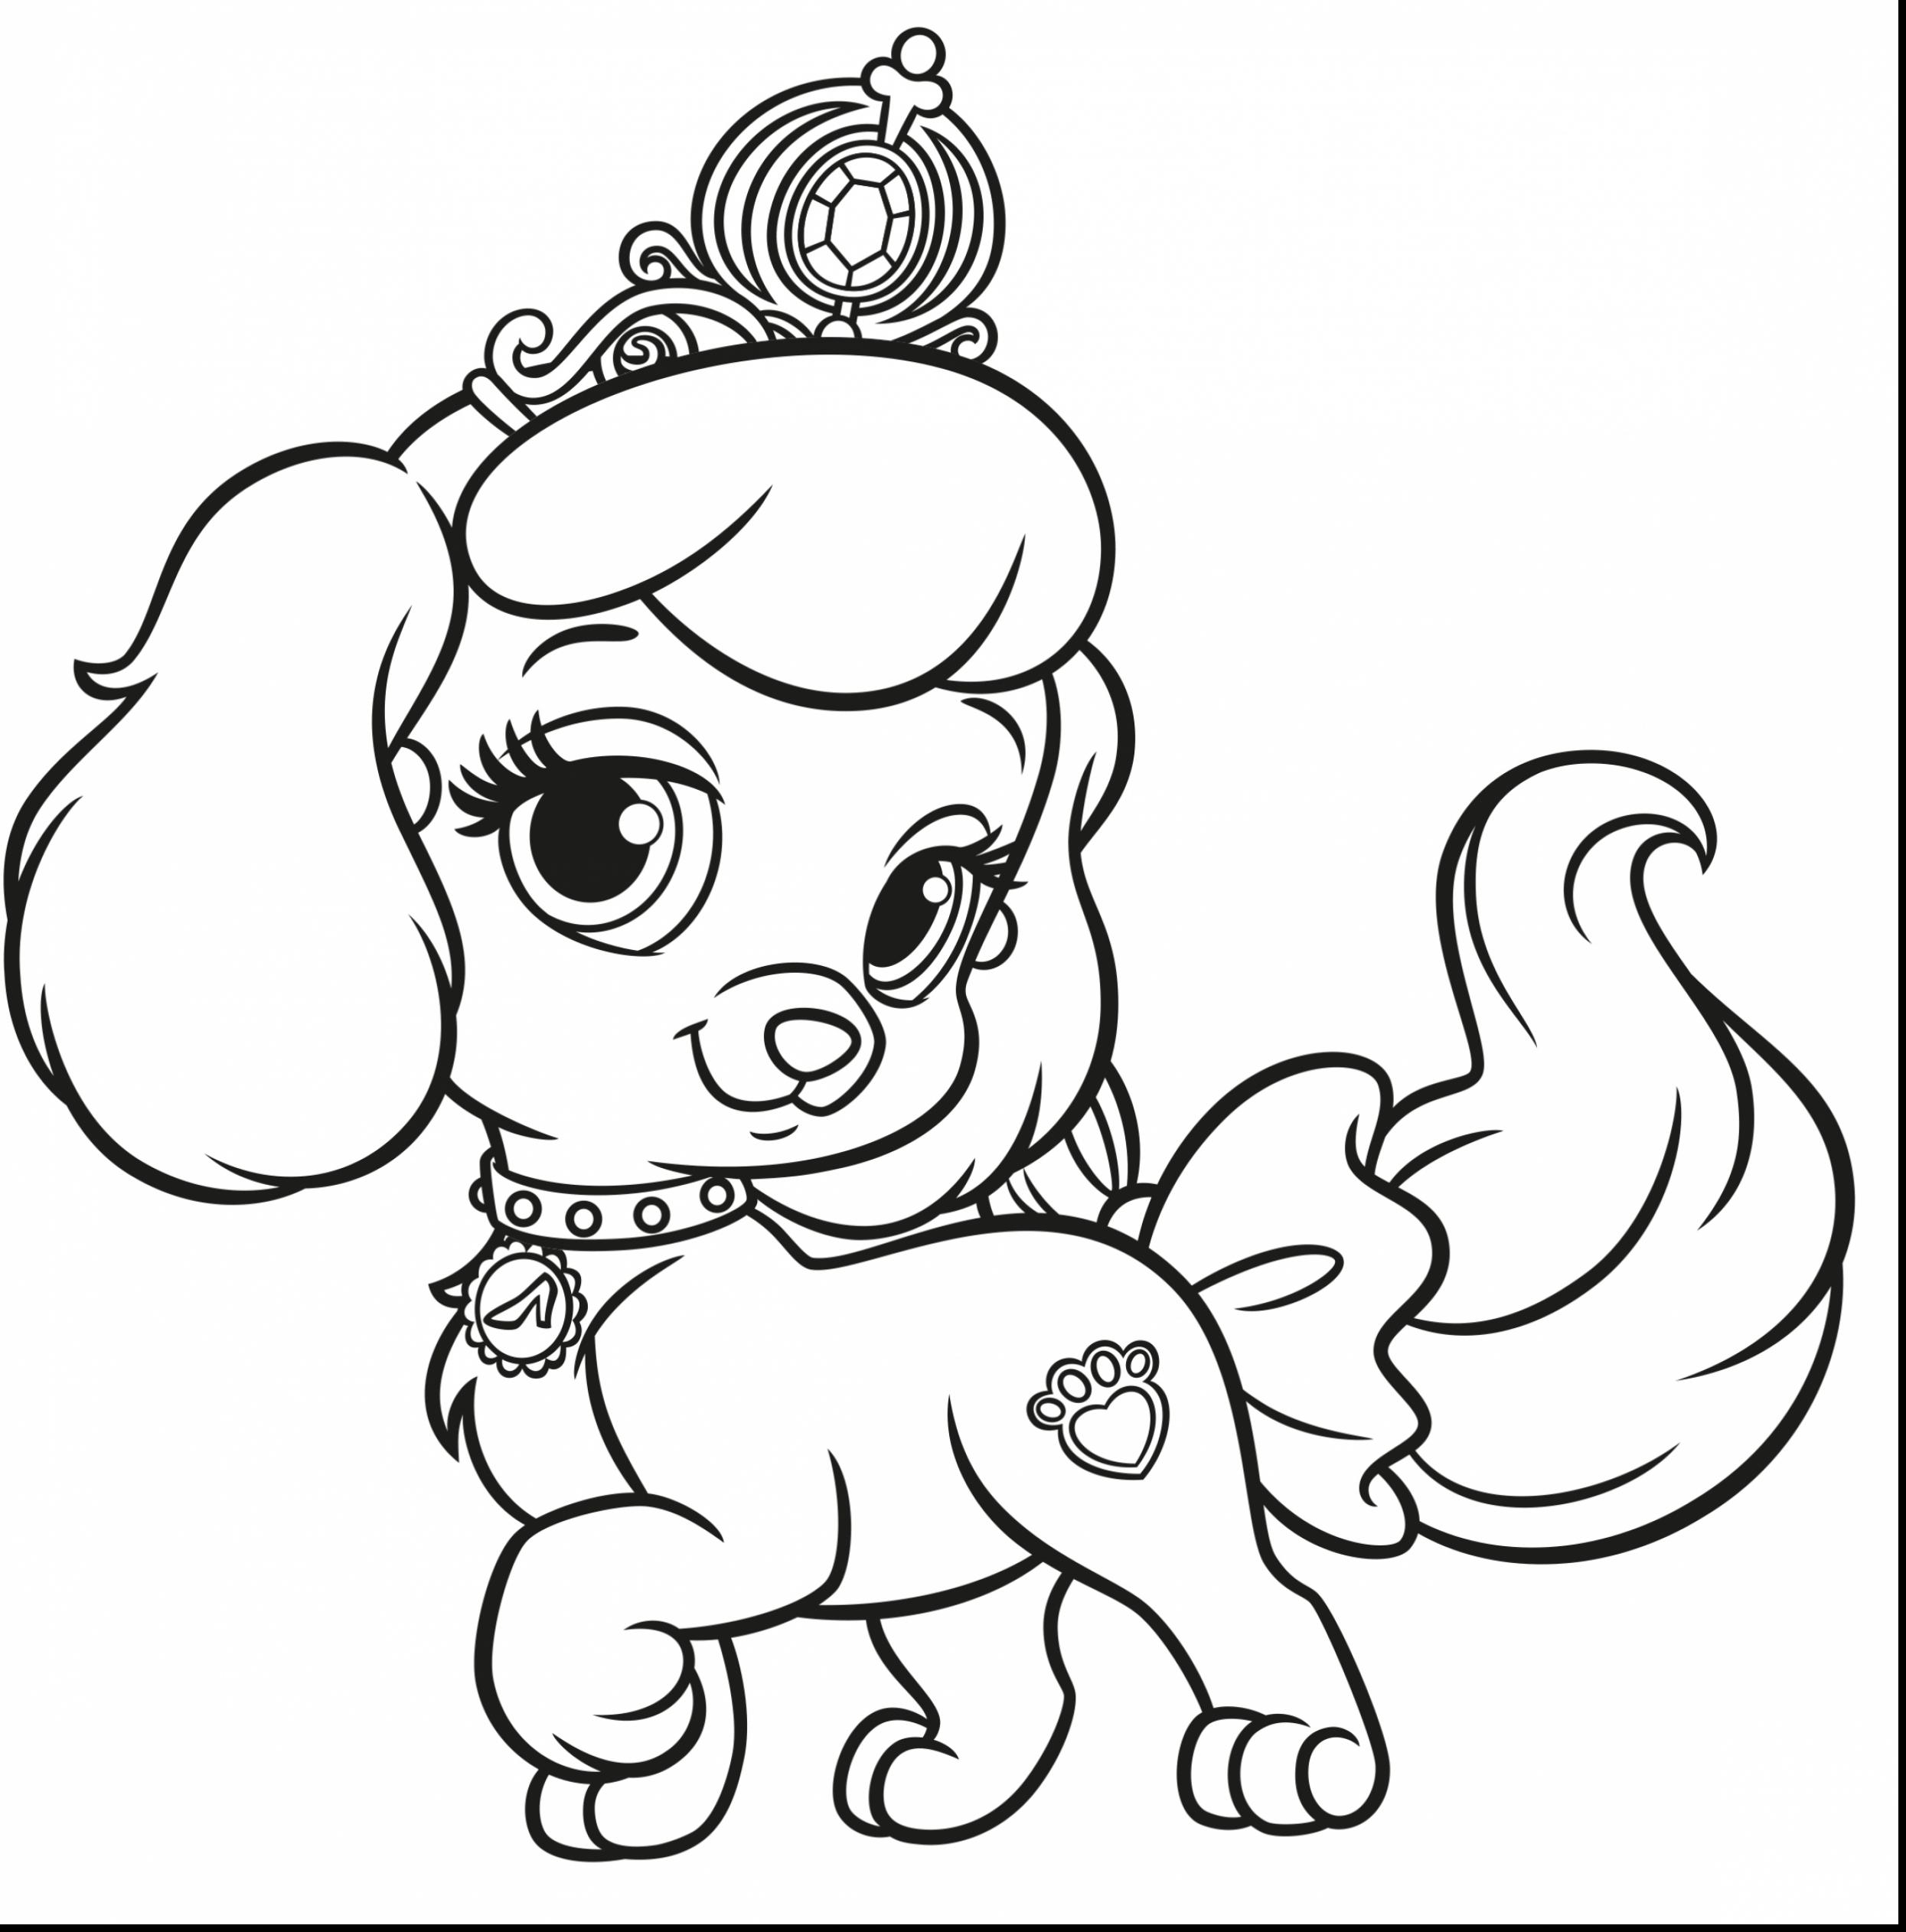 Lps Dog Coloring Pages at GetColorings.com | Free printable colorings